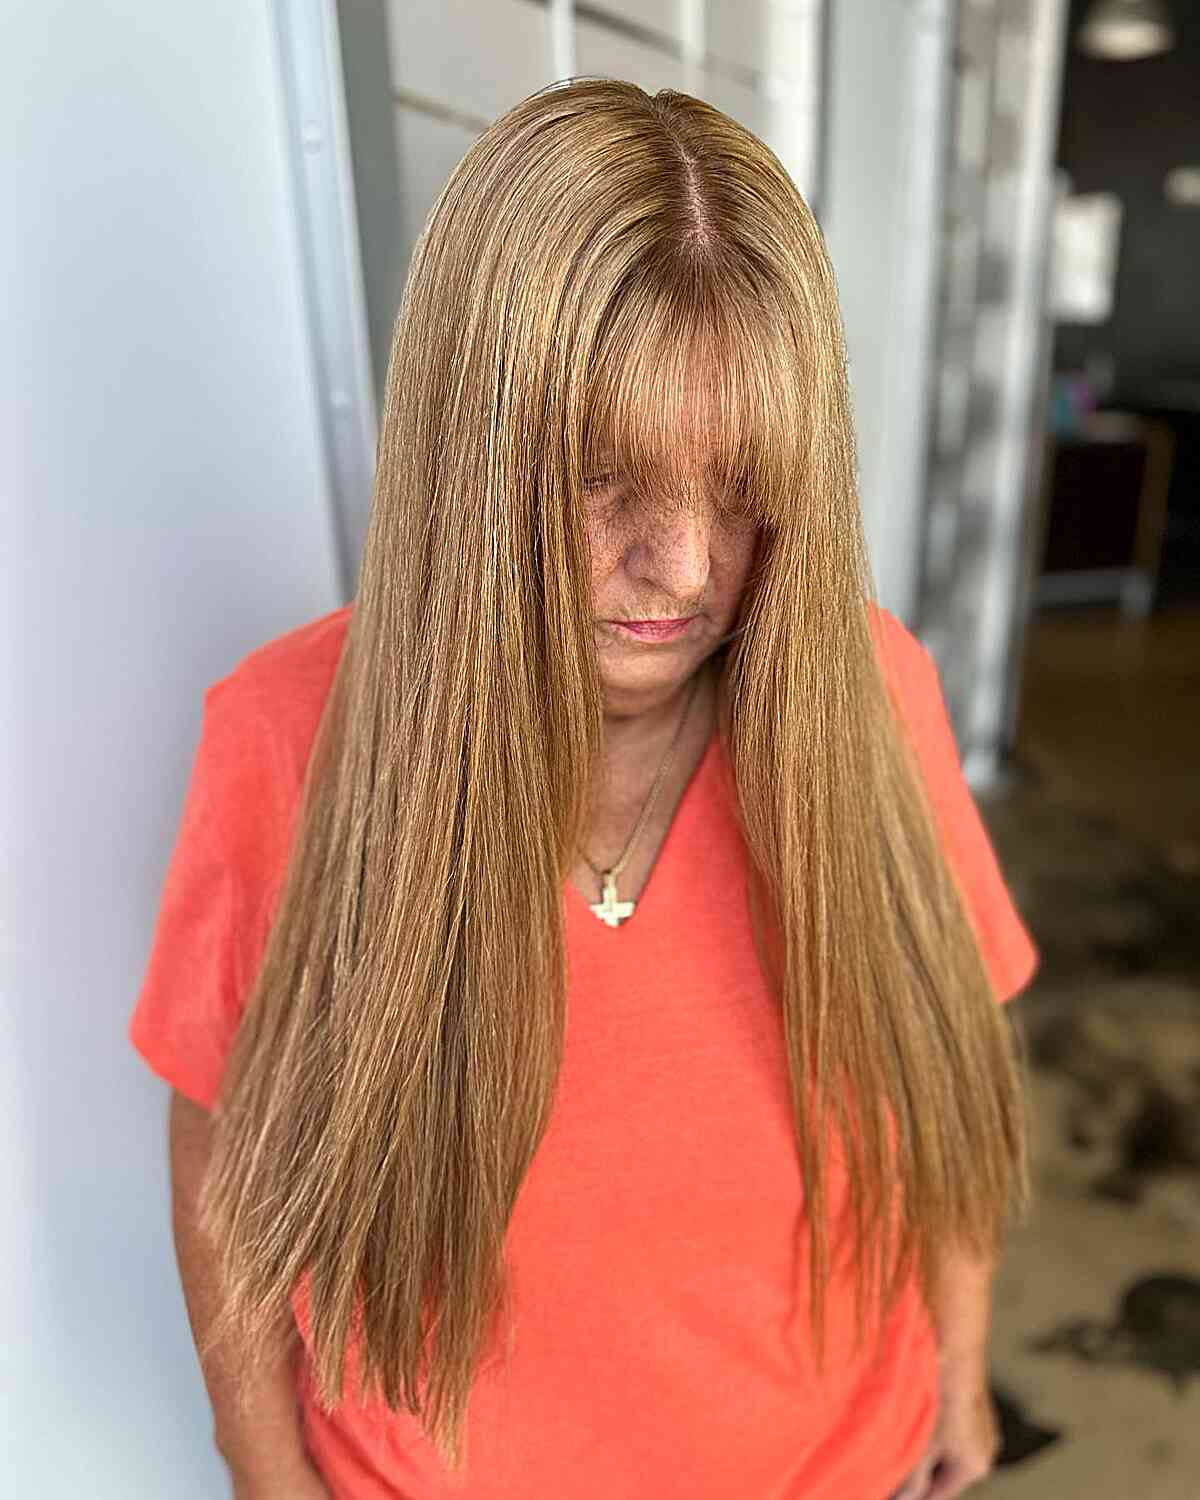 Long Straight Hair with Choppy Ends and Thin Bangs for Women Over 50